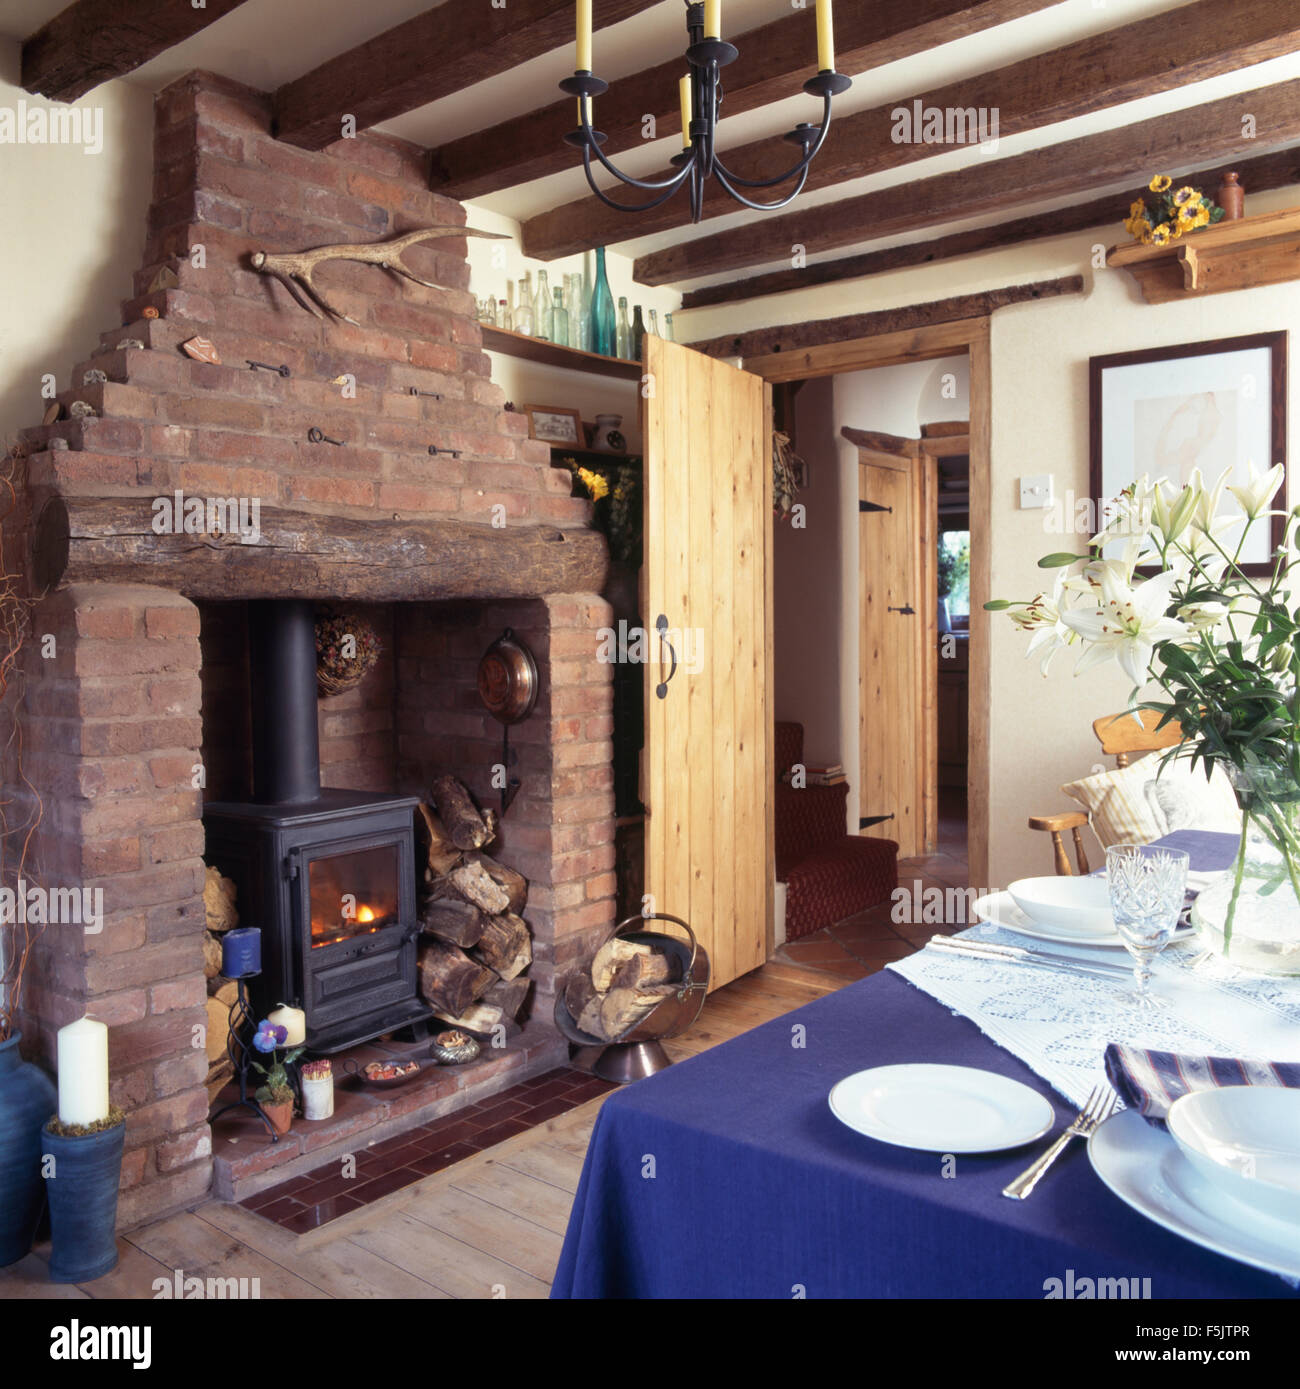 Wood burning stove in exposed brick fireplace in a cottage dining room with a blue cloth on table set for lunch Stock Photo